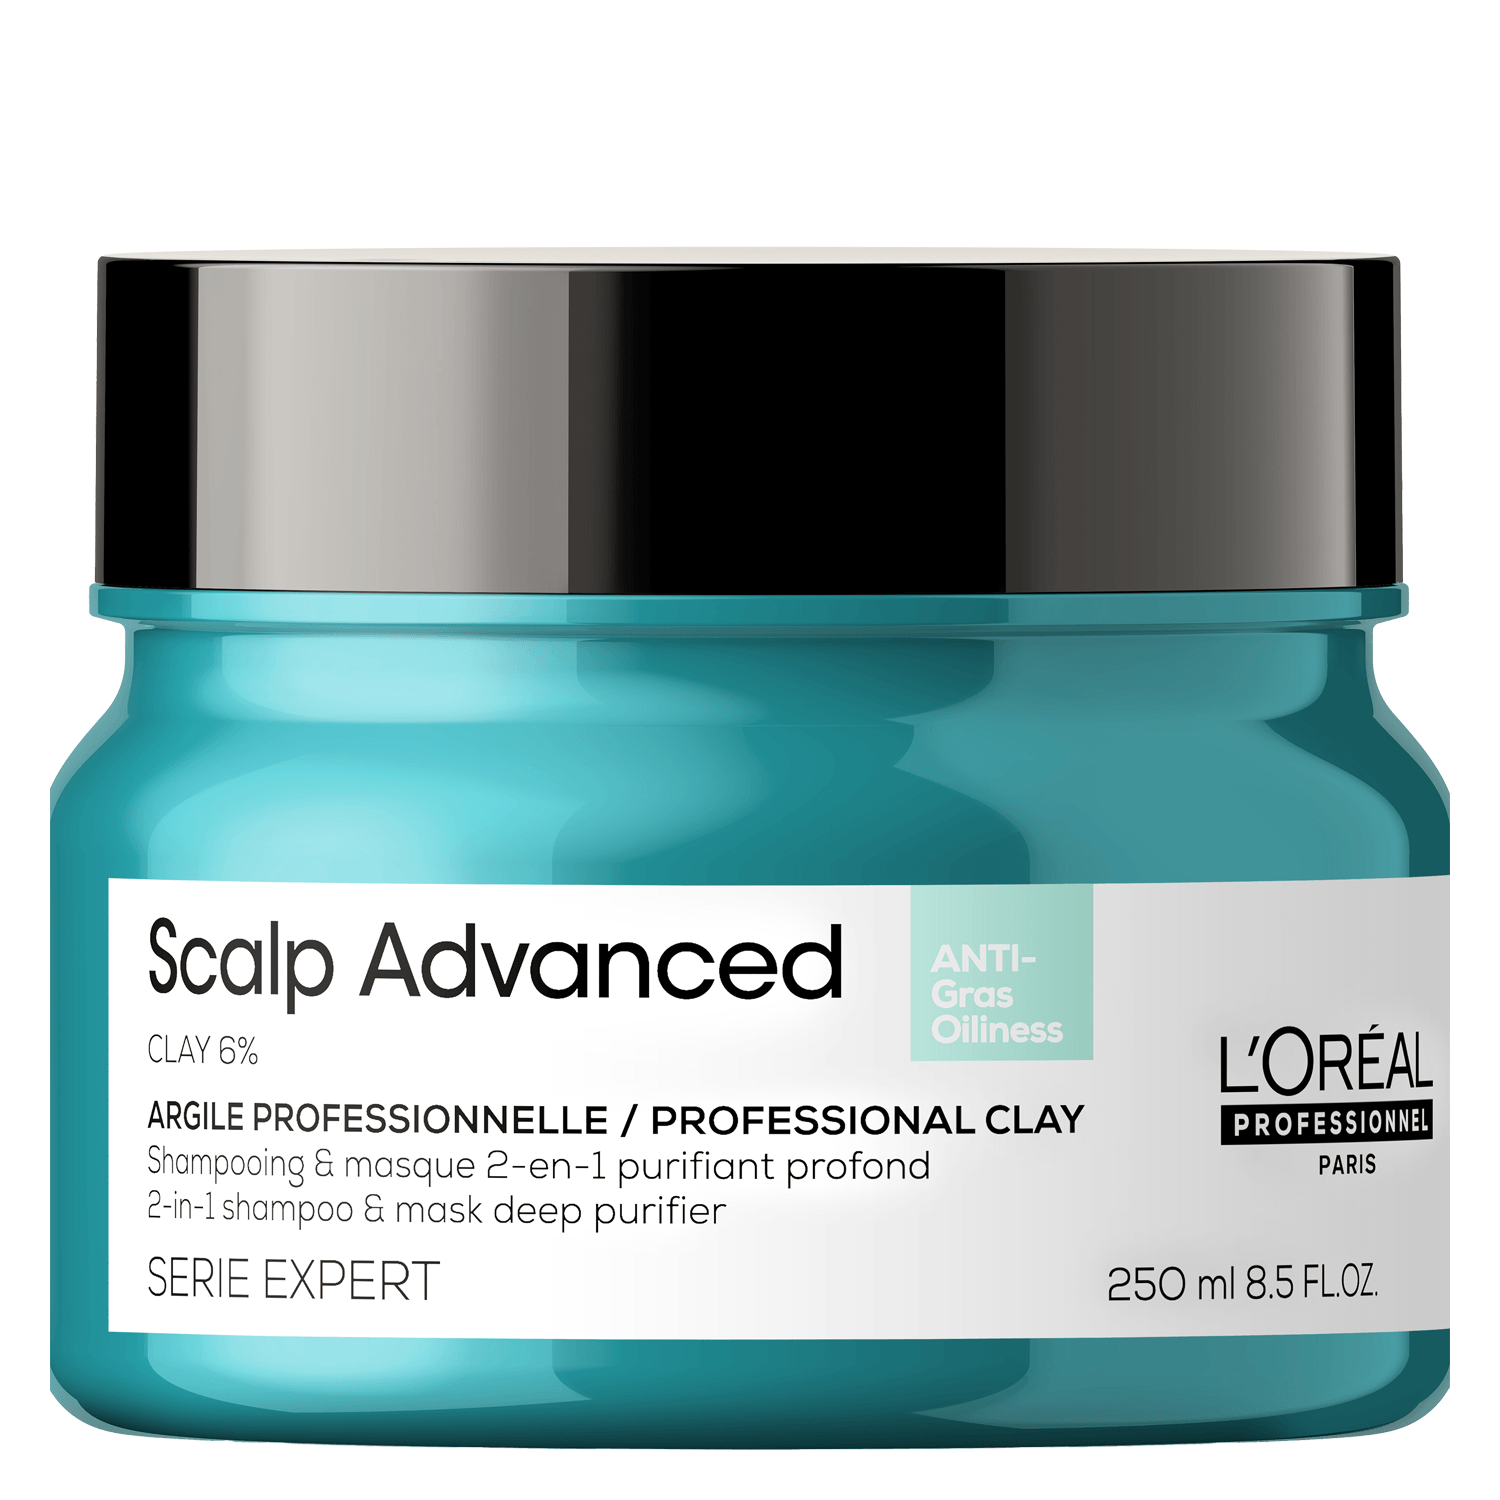 Product image from Série Expert Scalp Advanced - Anti-Oiliness 2in1 Deep Purifier Clay